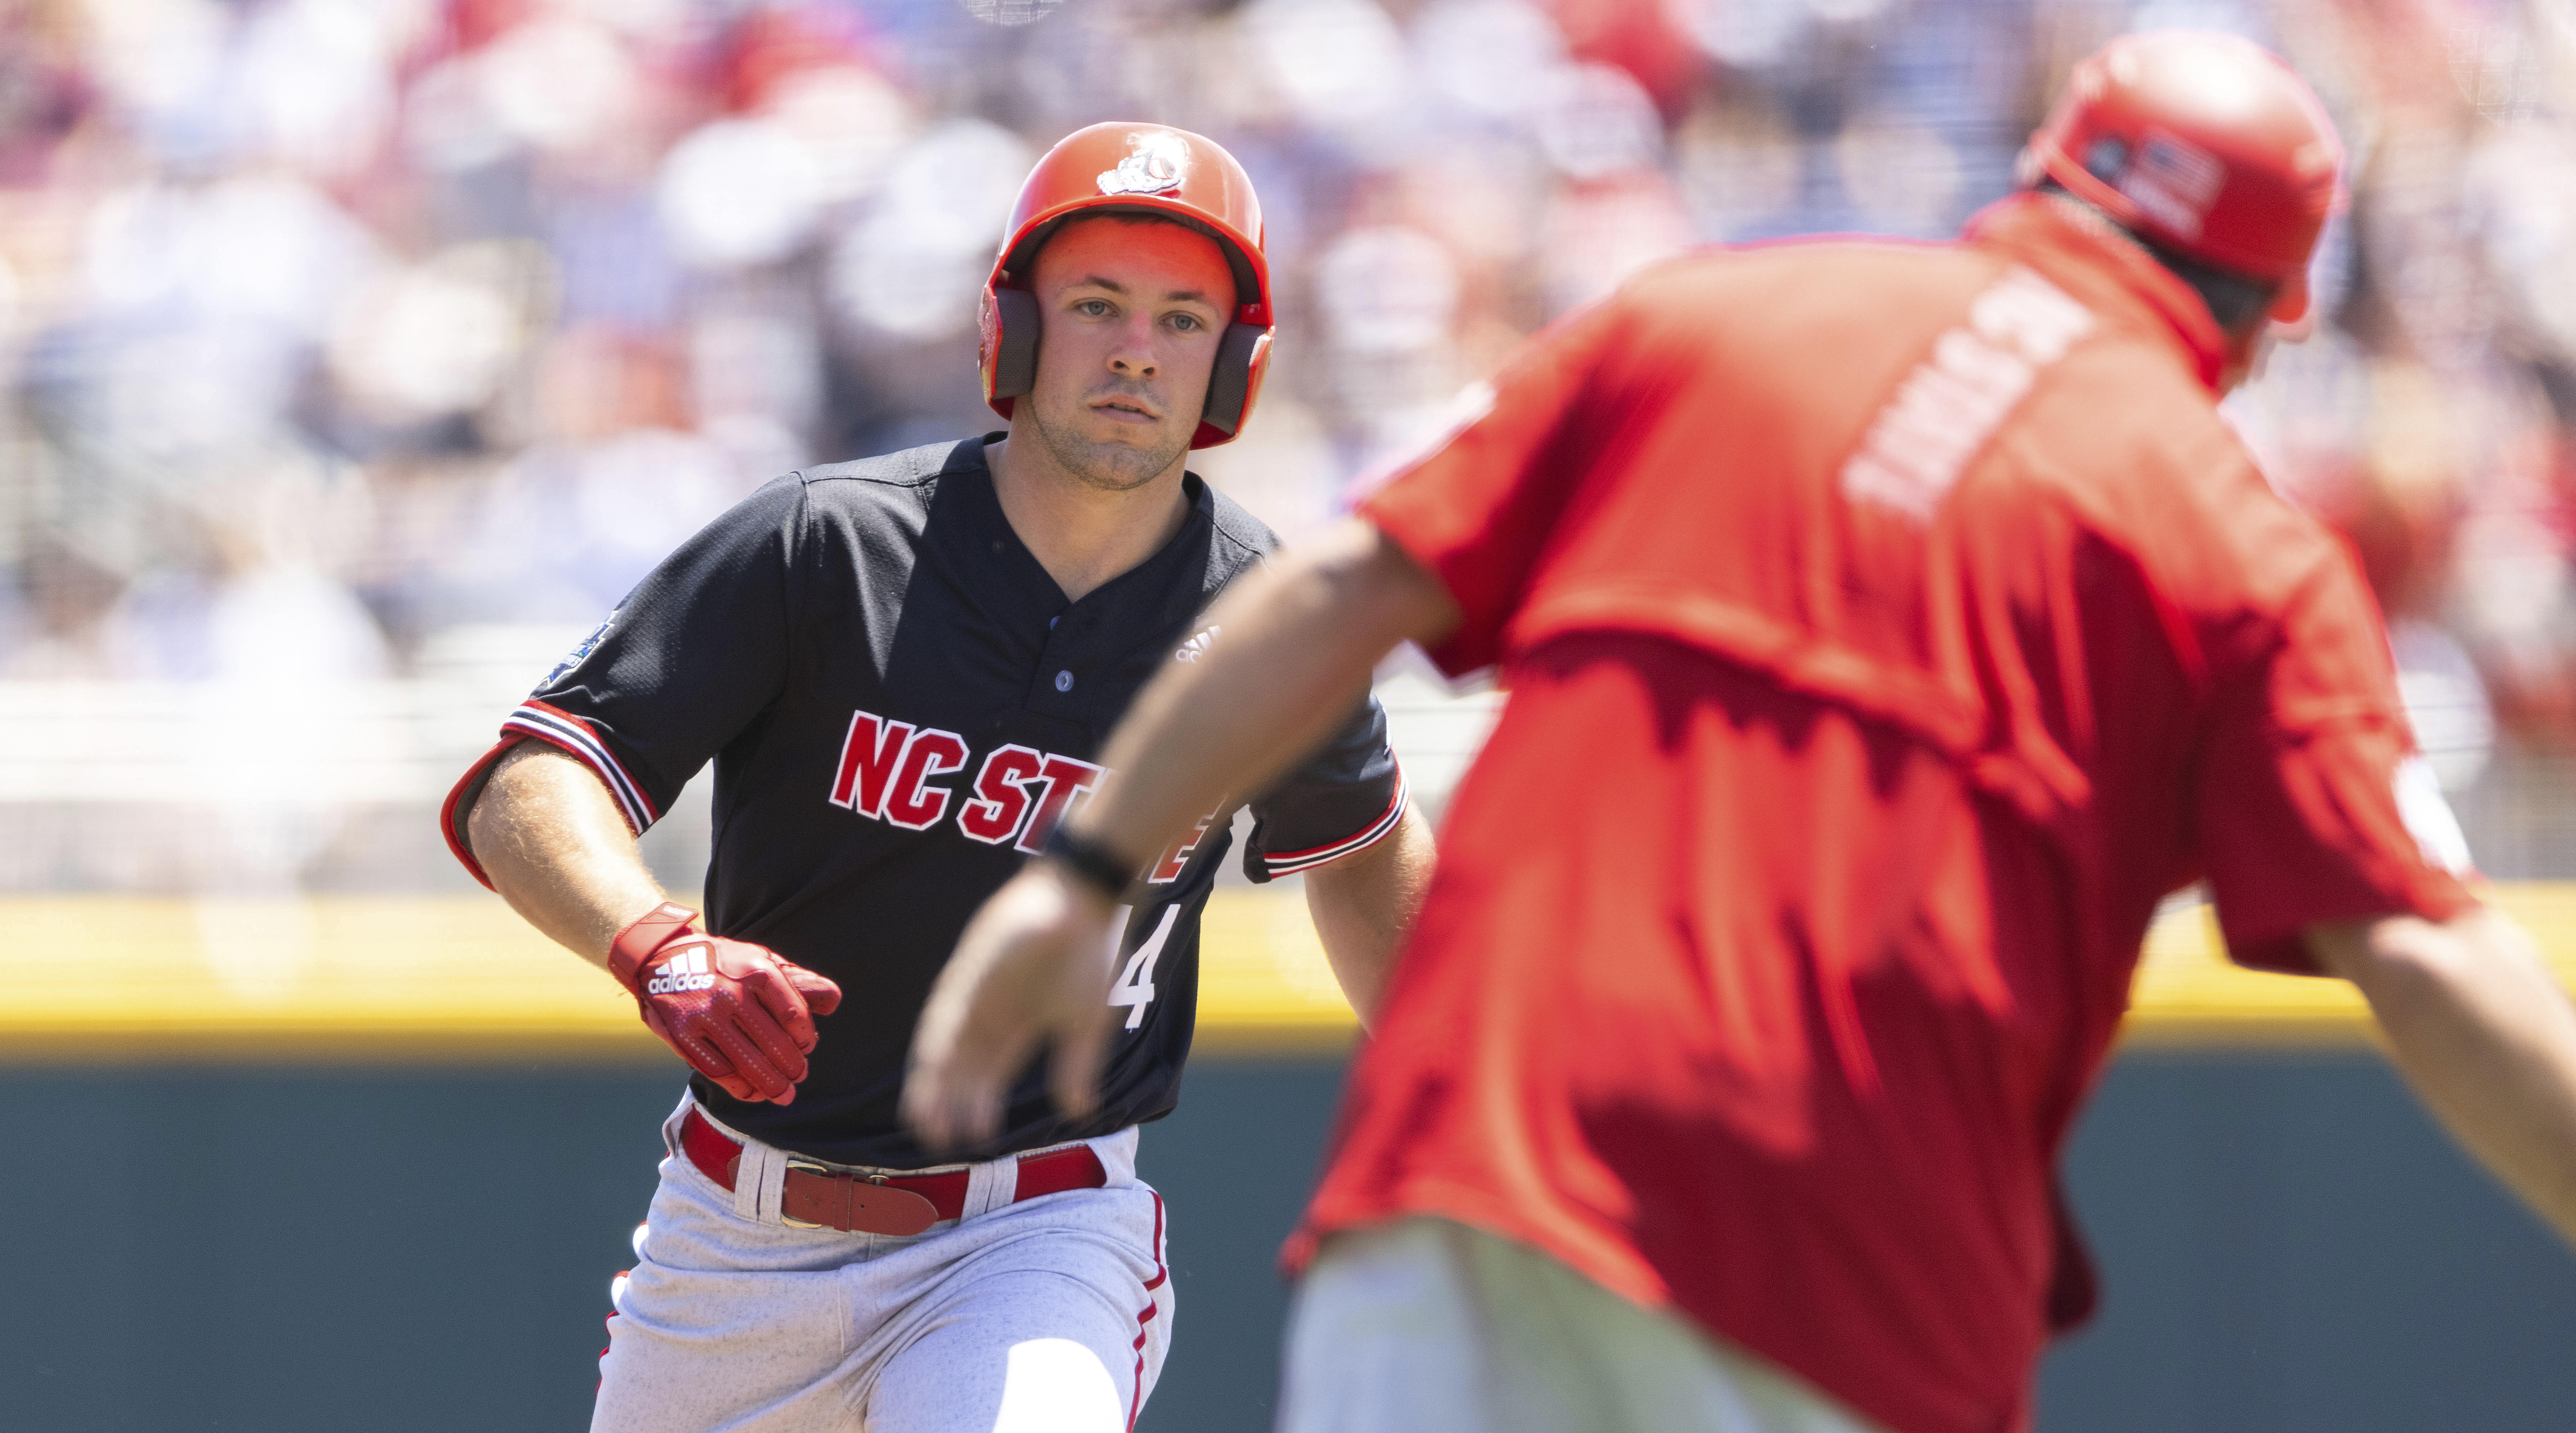 NC State knocks out No. 1 Arkansas on Torres; homer in 9th